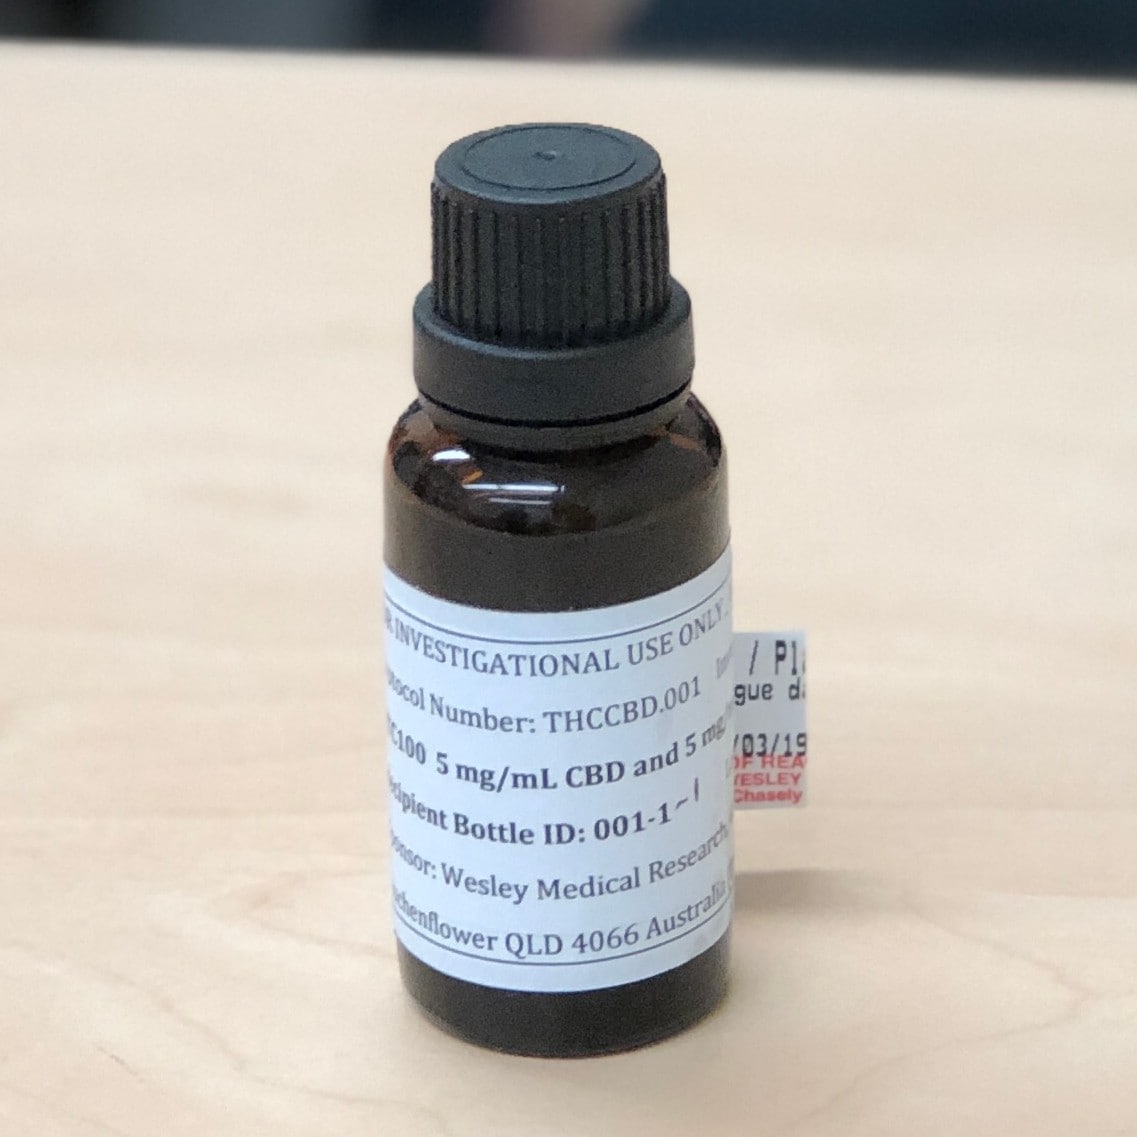 Photo of a small bottle containing medicinal cannabis